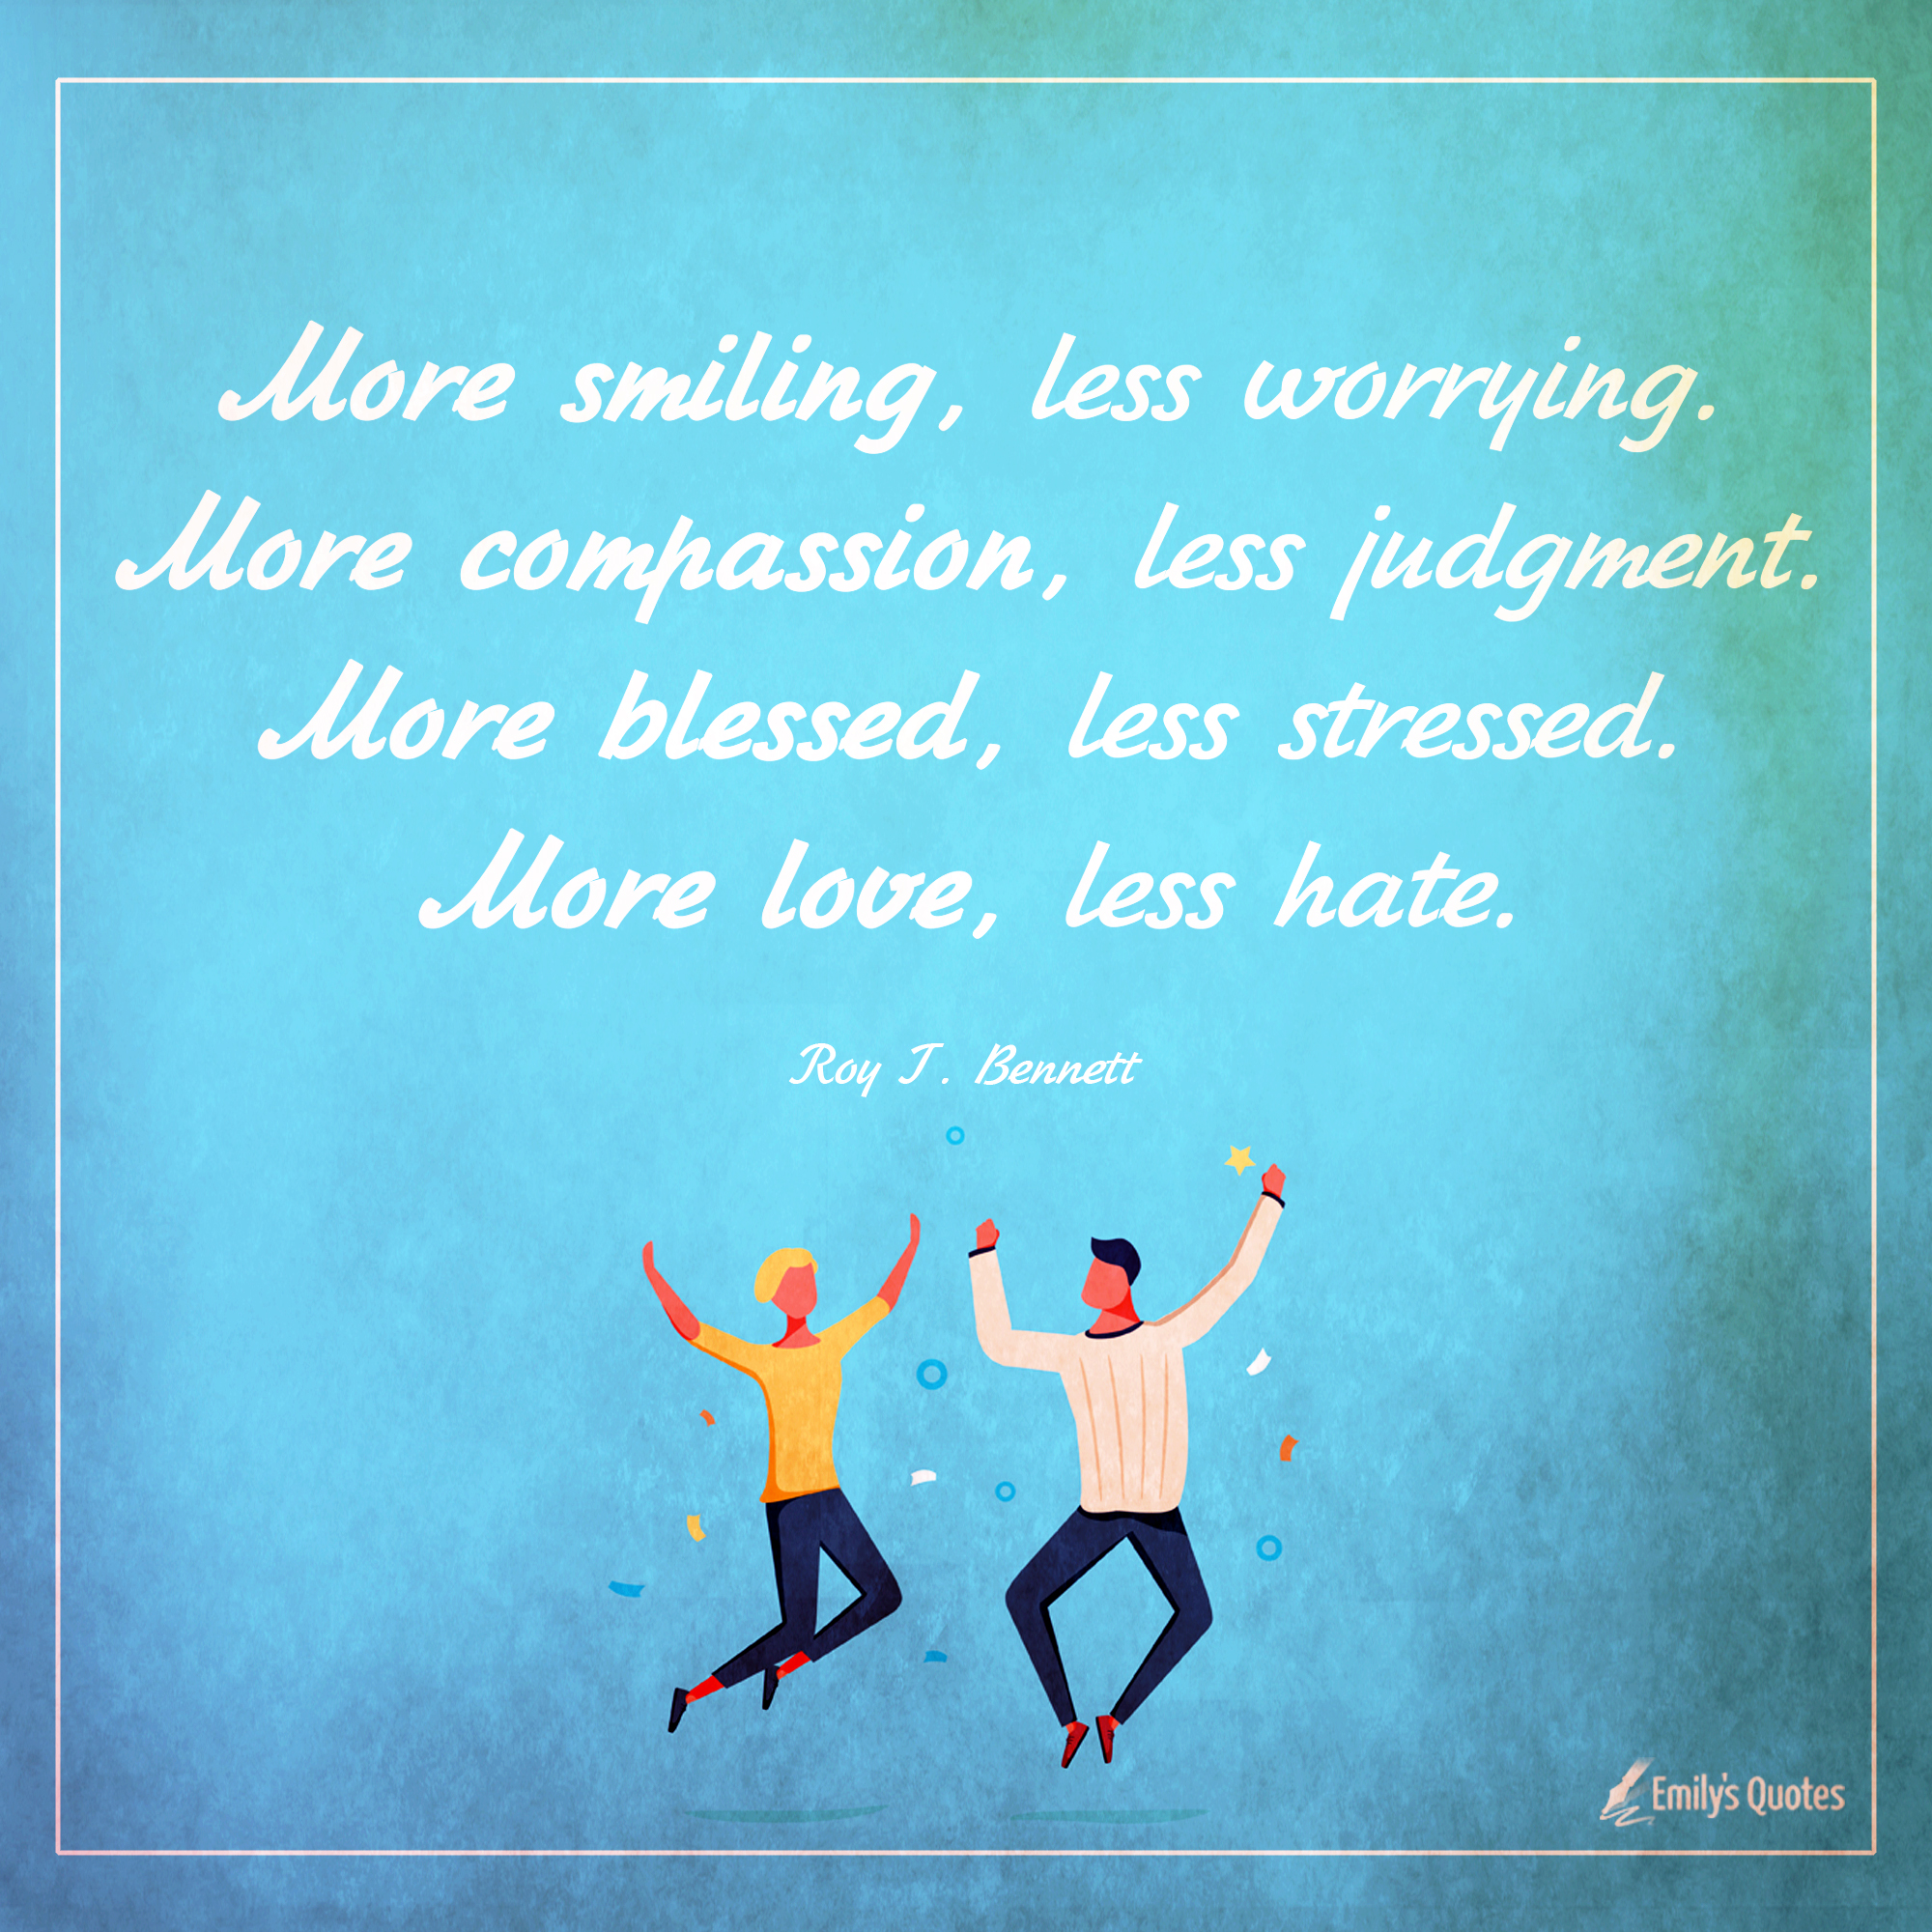 More smiling, less worrying. More compassion, less judgment. More blessed